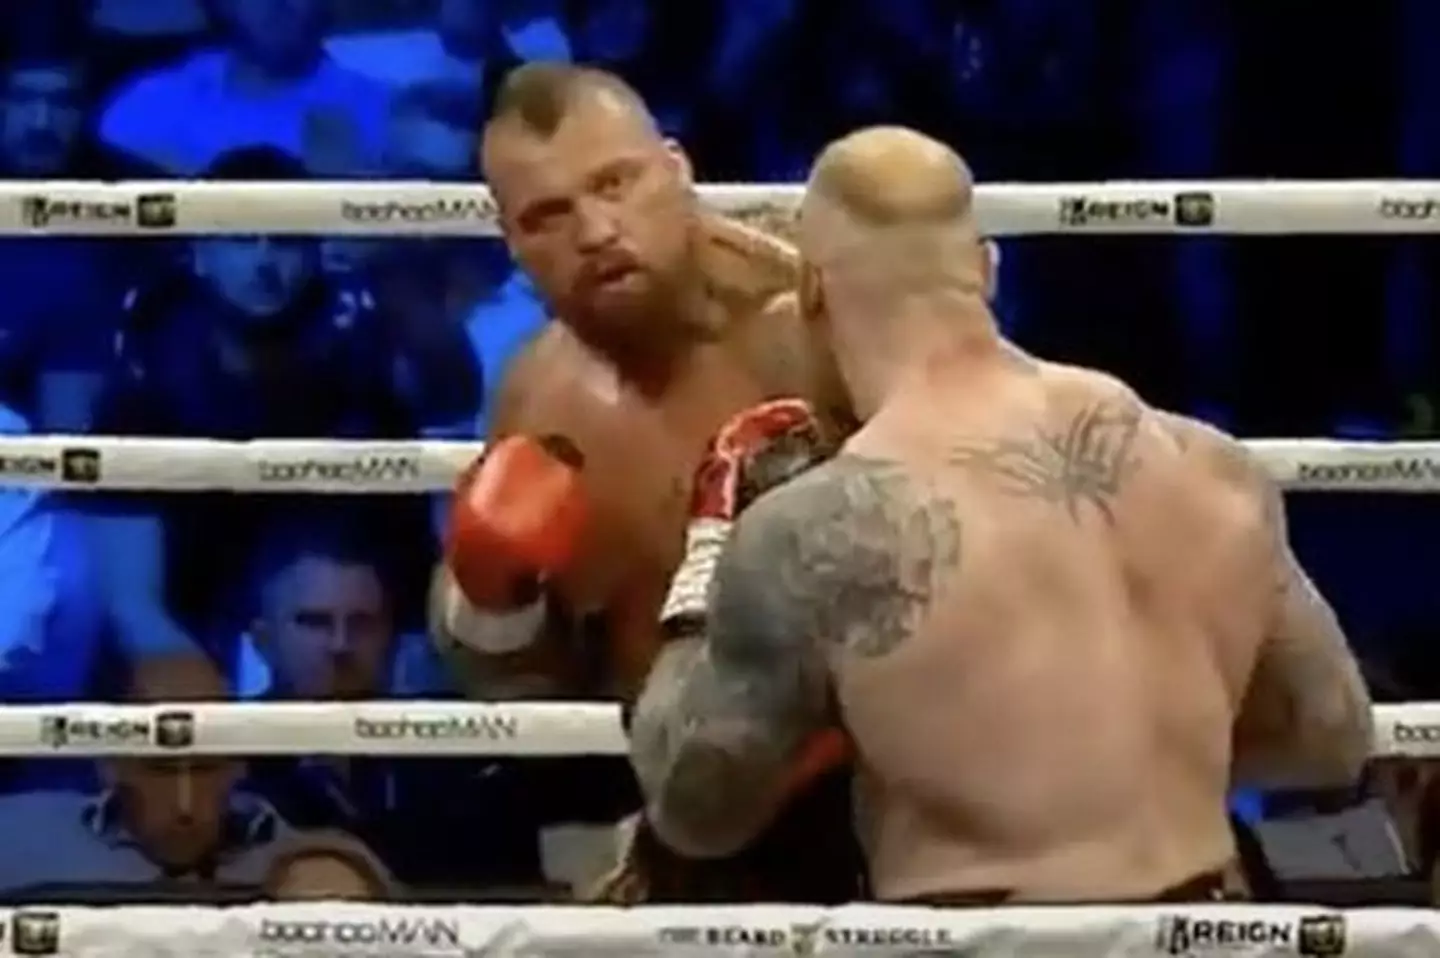 Eddie Hall and Thor fought six rounds.